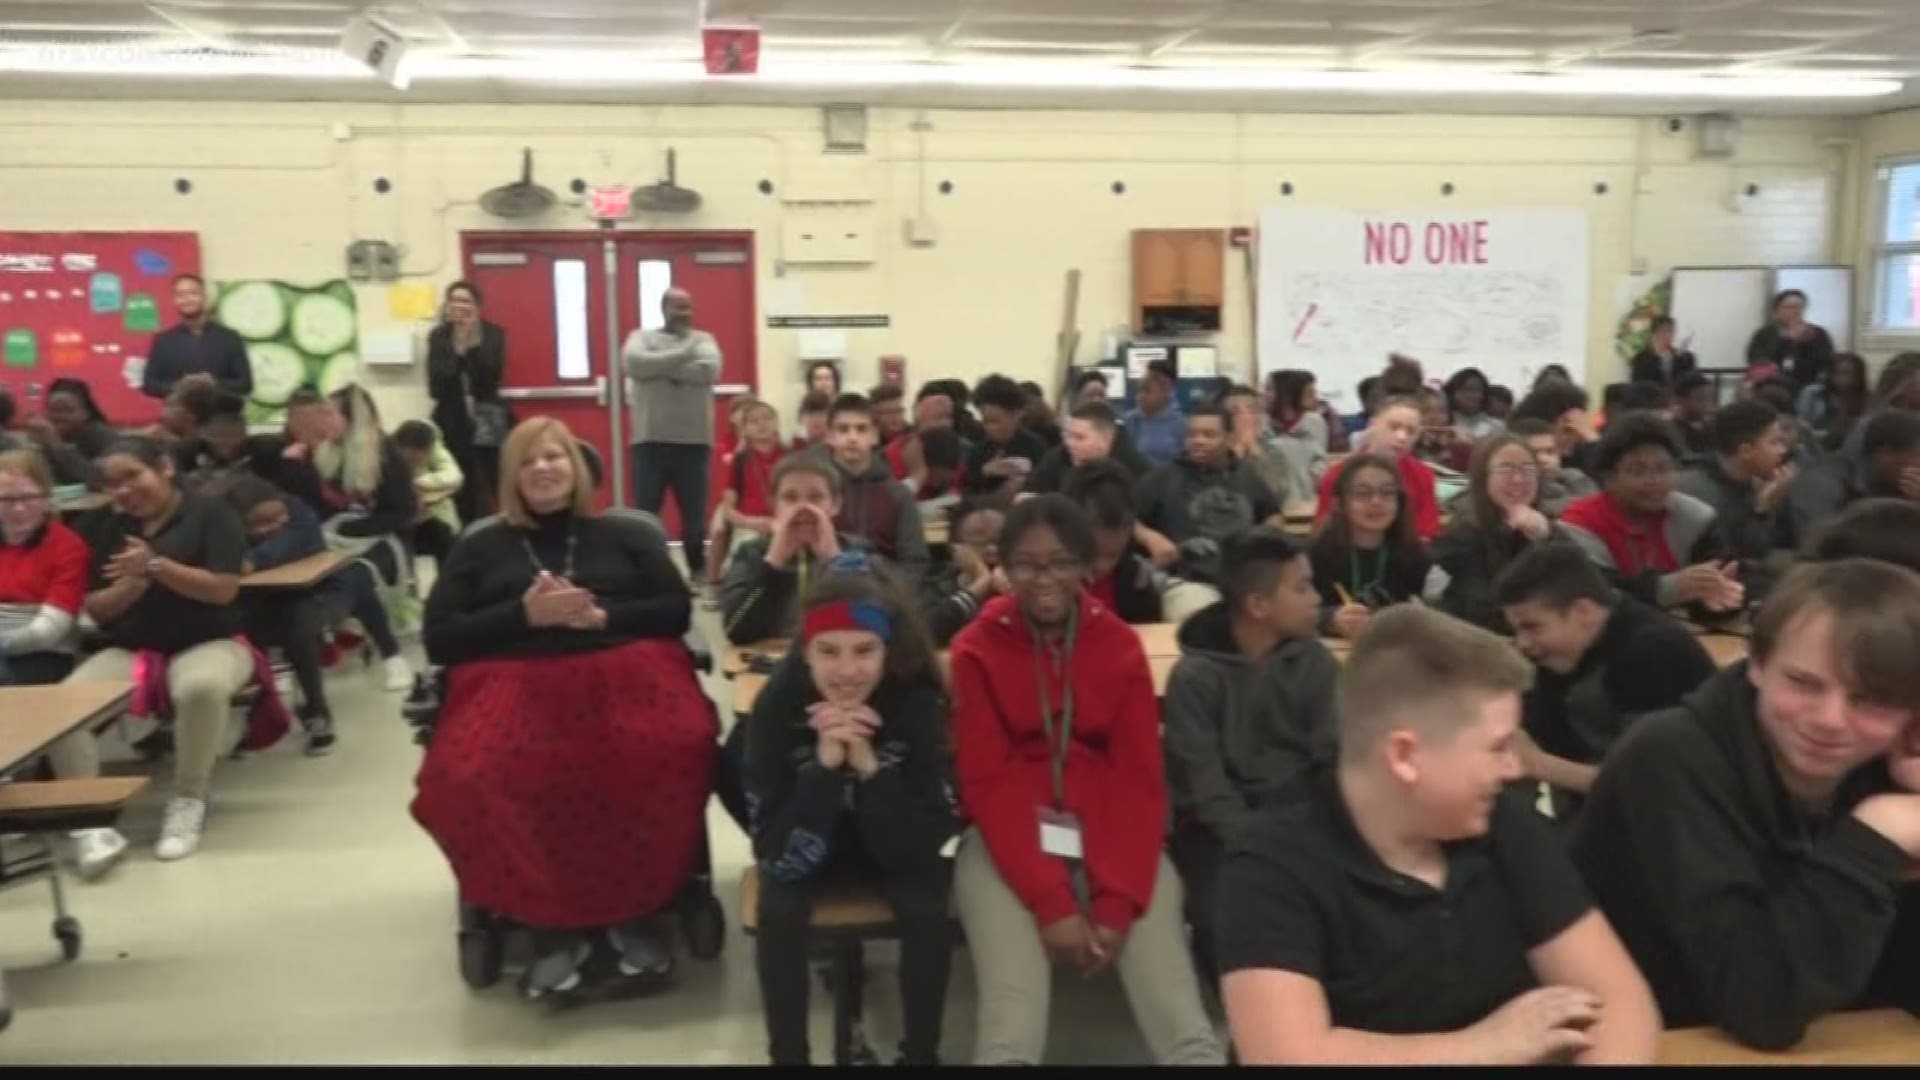 On Friday a J.E.B. Stuart Middle School student got a big surprise that will change his life.